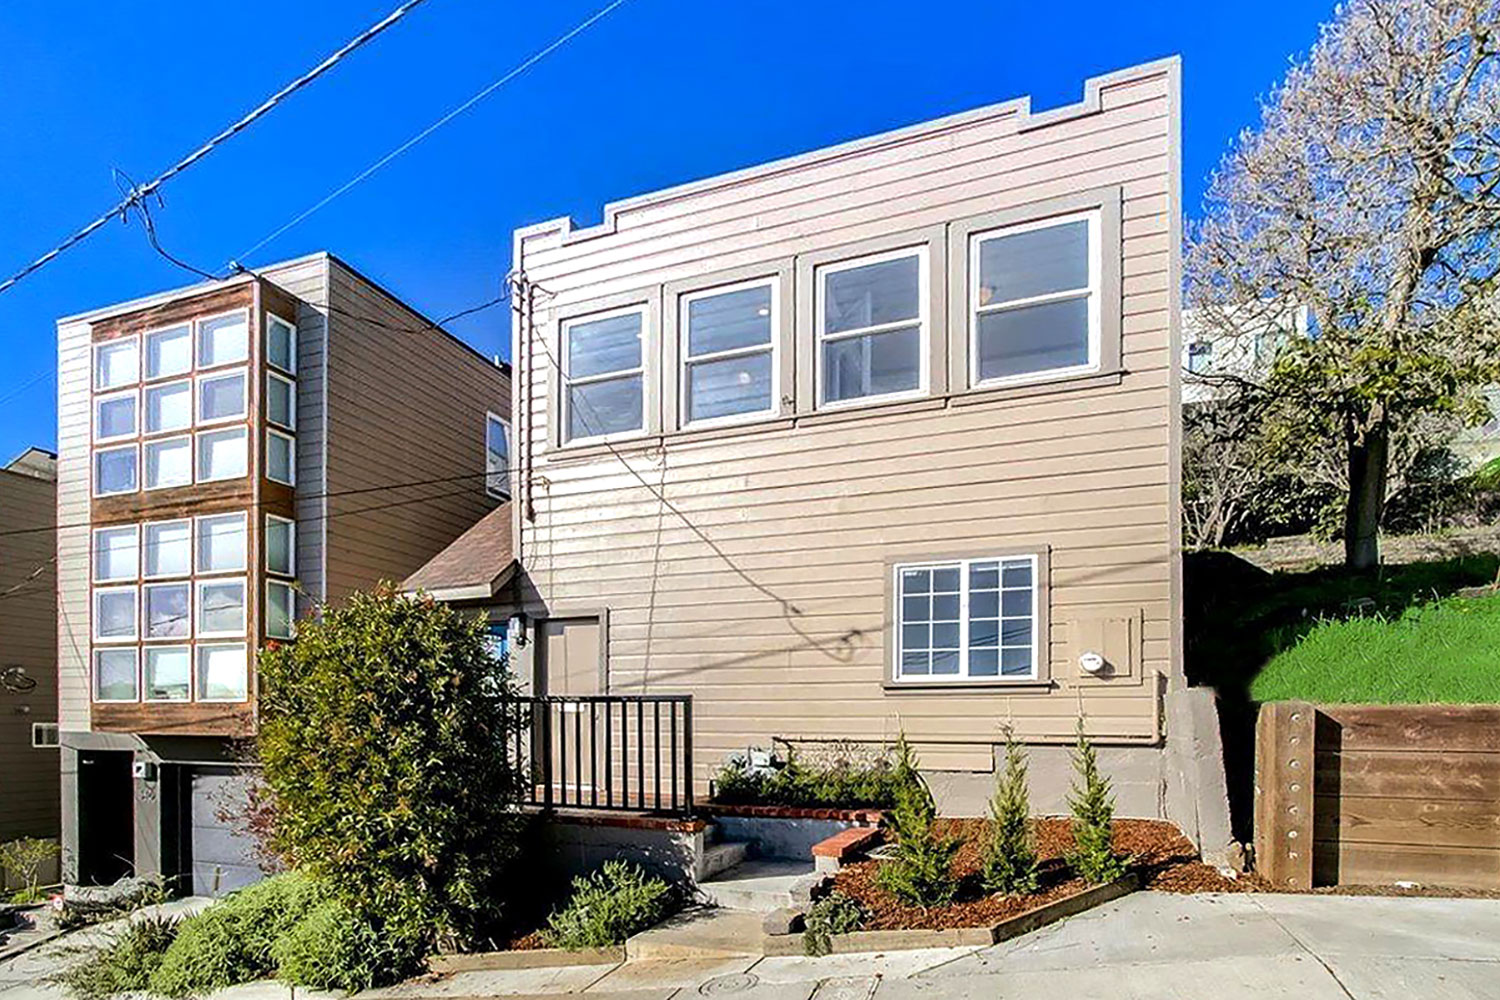 Renovated 2-story single family home in Bernal Heights. Landscaped walk-up entry. Exterior painted beige.